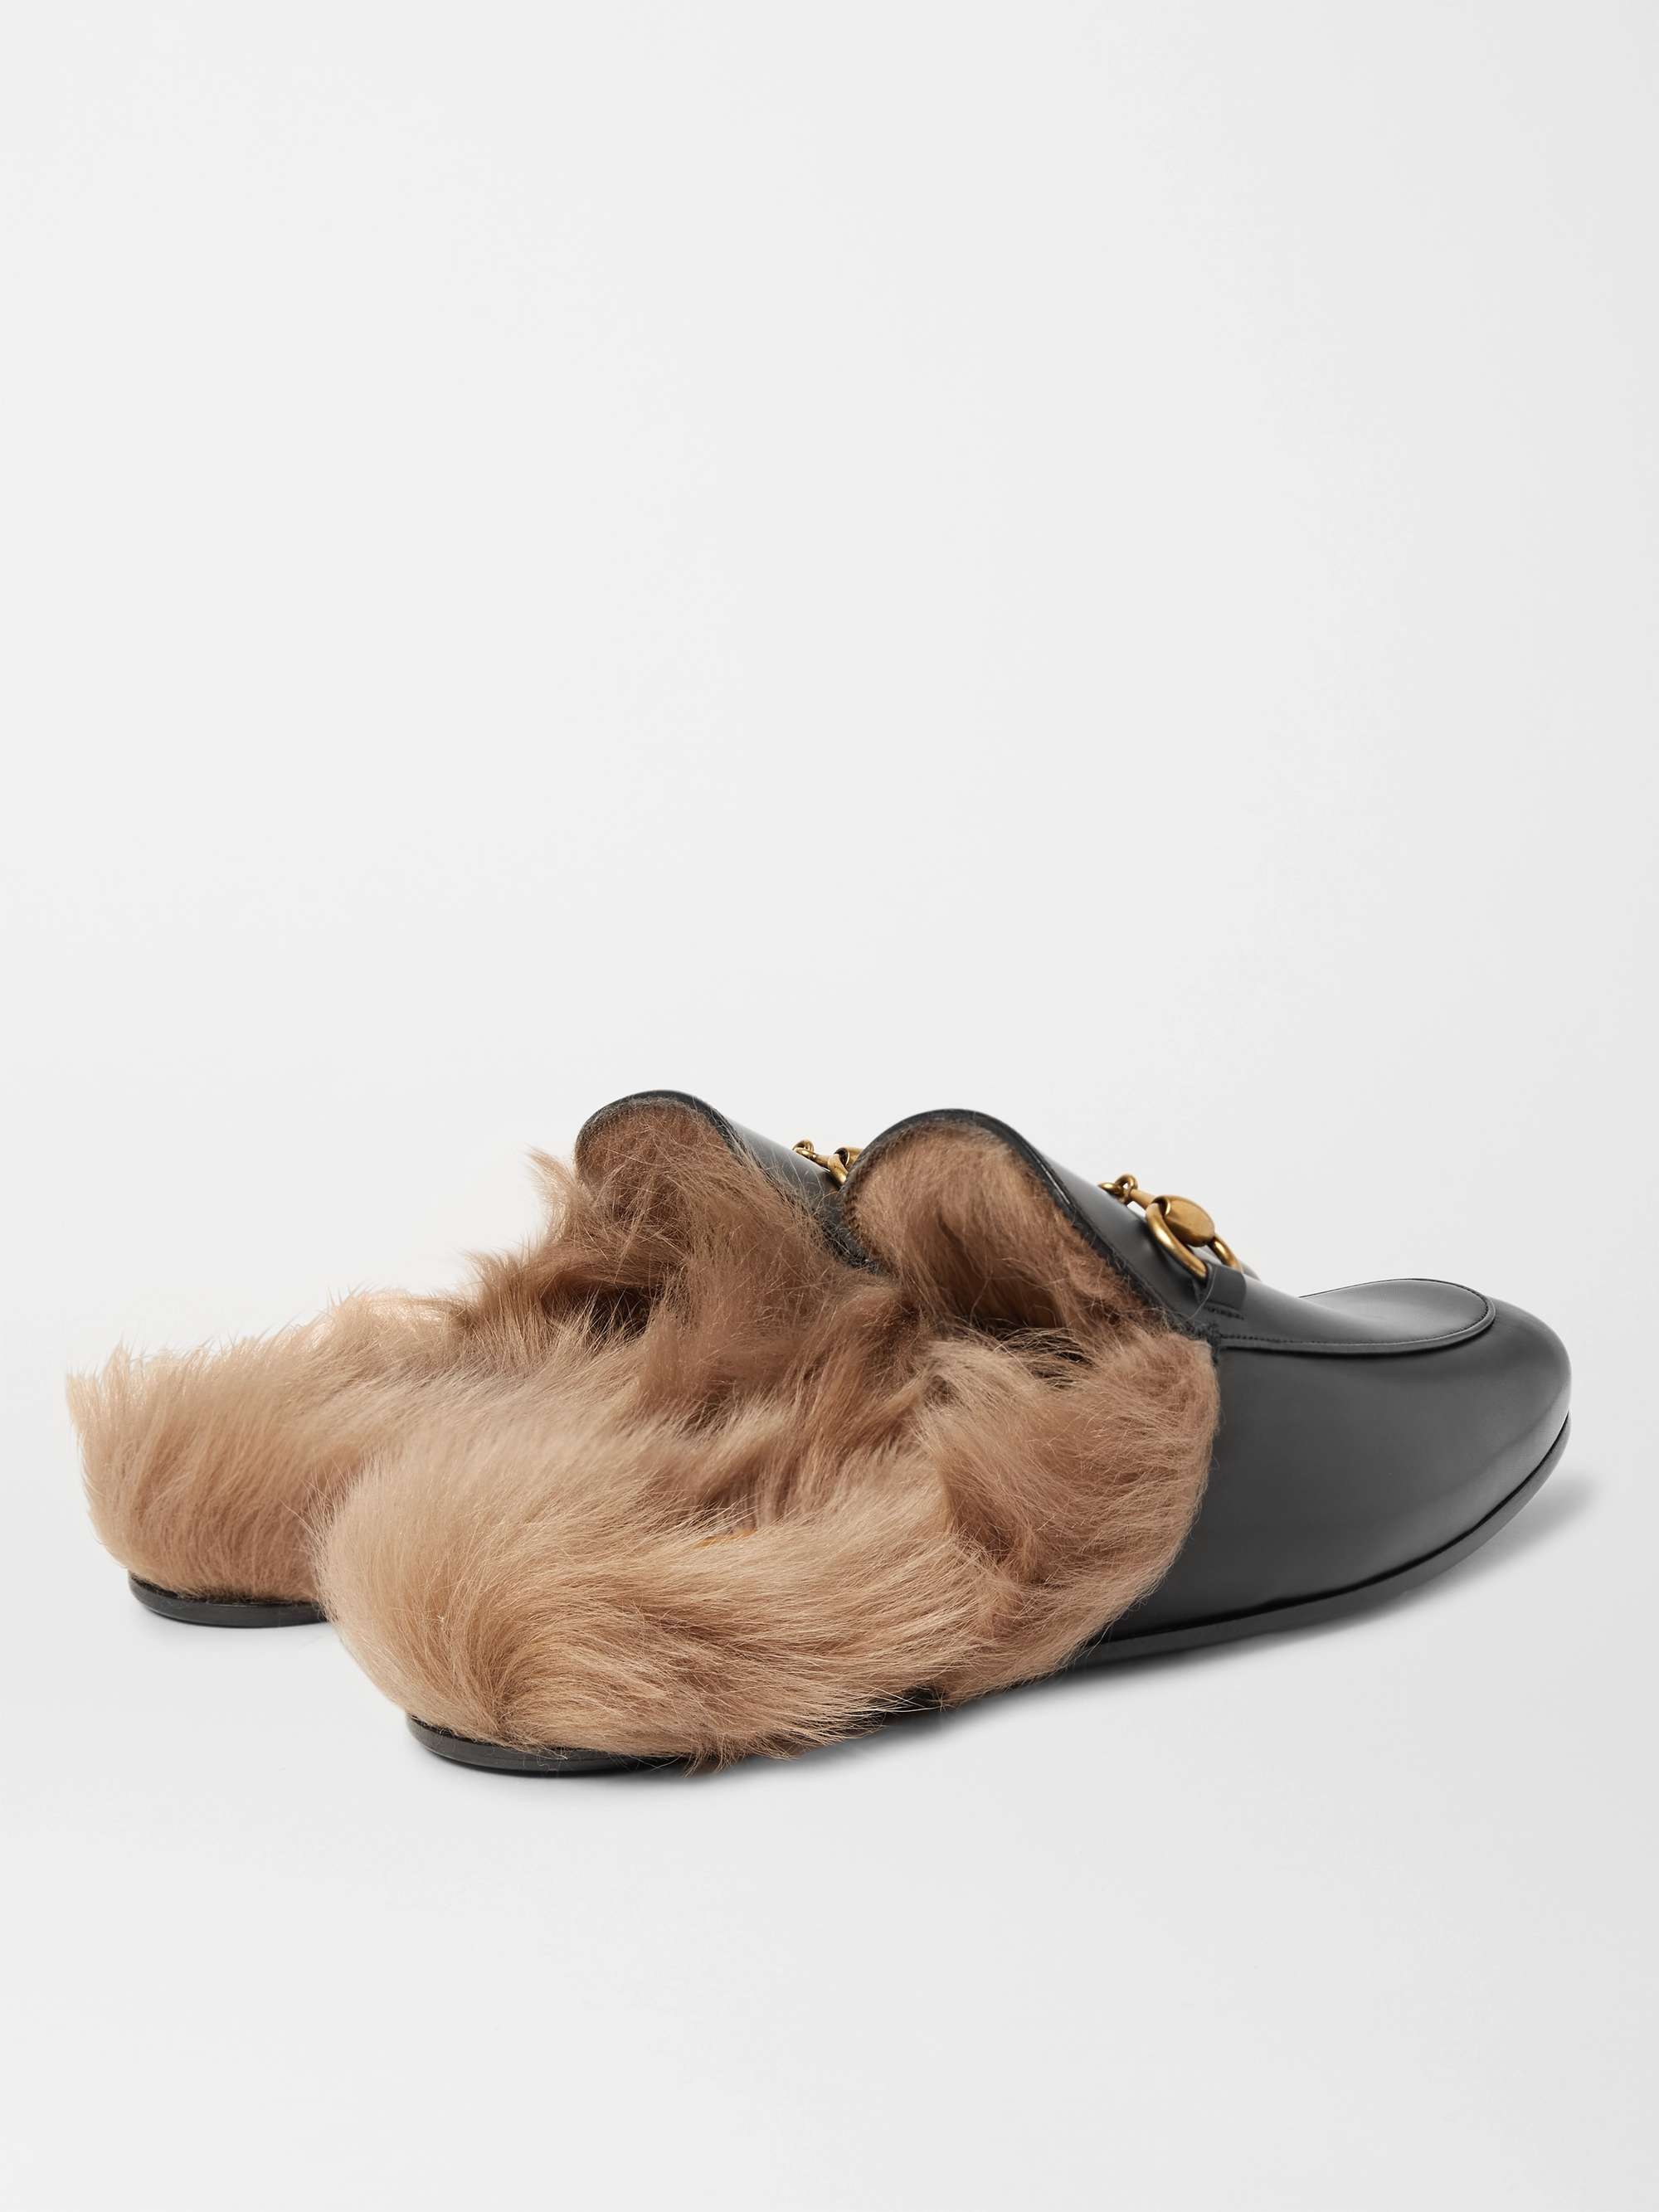 GUCCI Princetown Horsebit Shearling-Lined Leather Backless Loafers